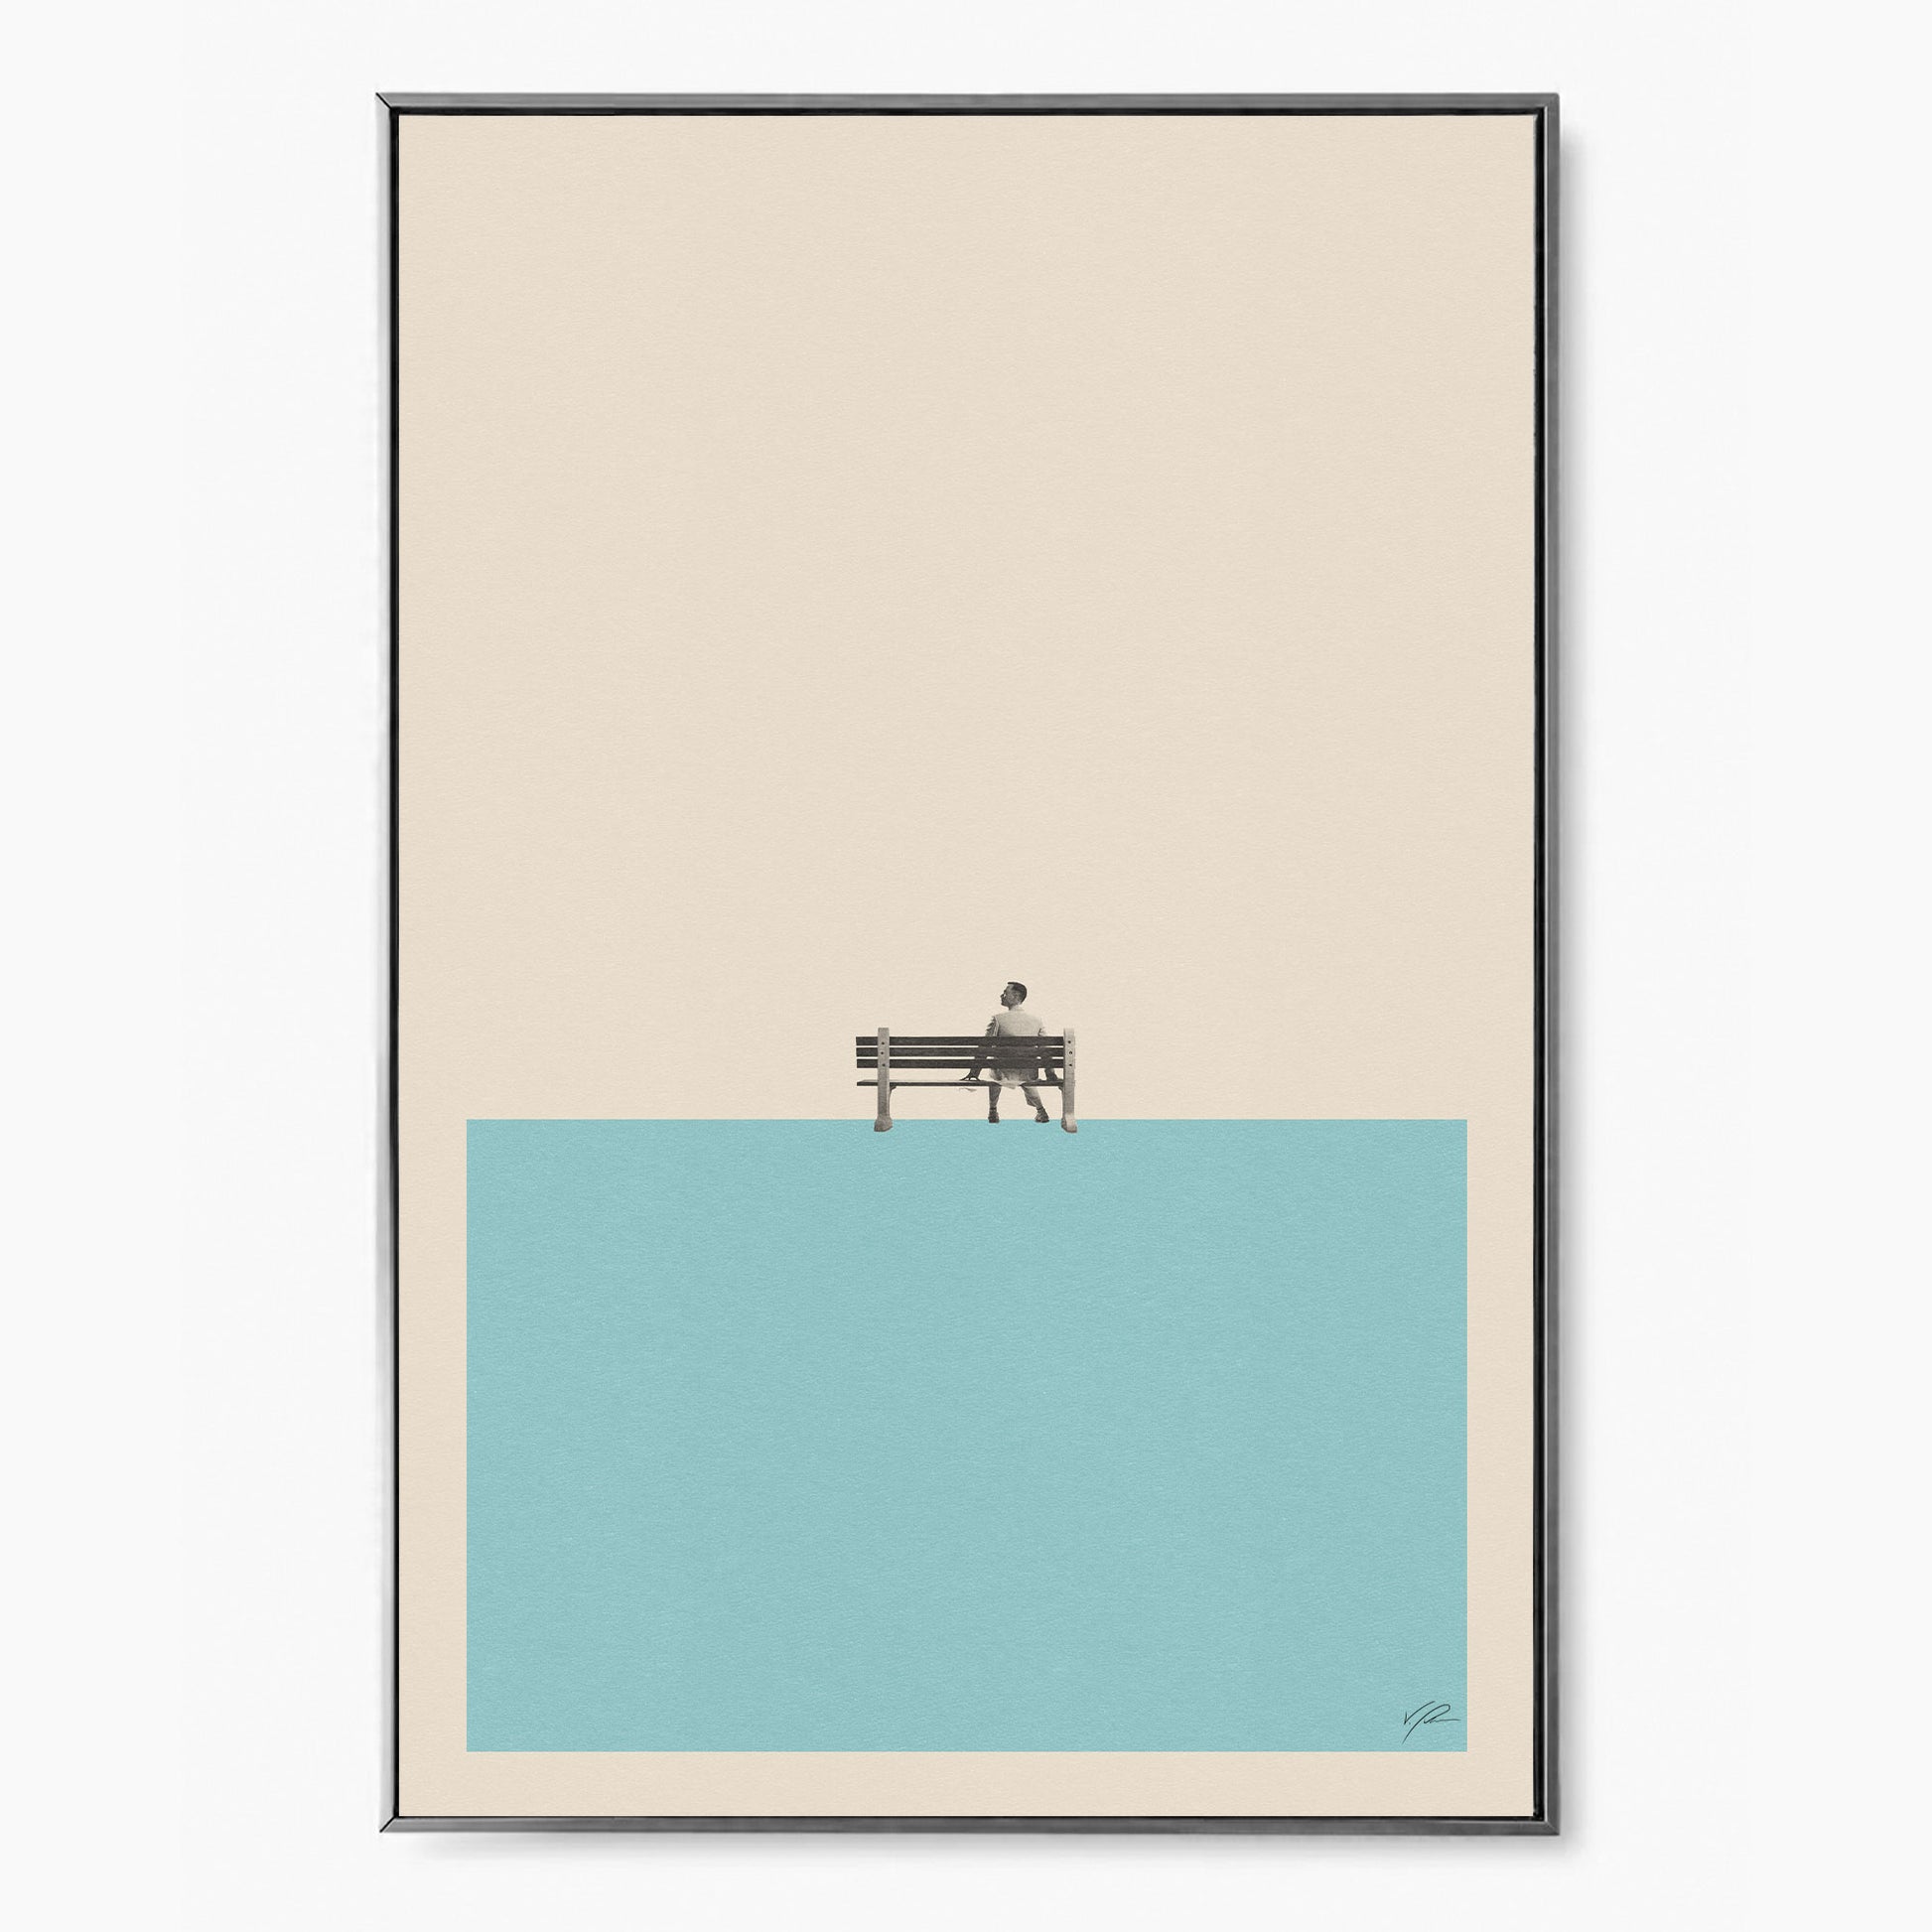 A Forrest Gump-inspired print featuring a wallflower sitting on a bench in the water from thewallflowerclub.